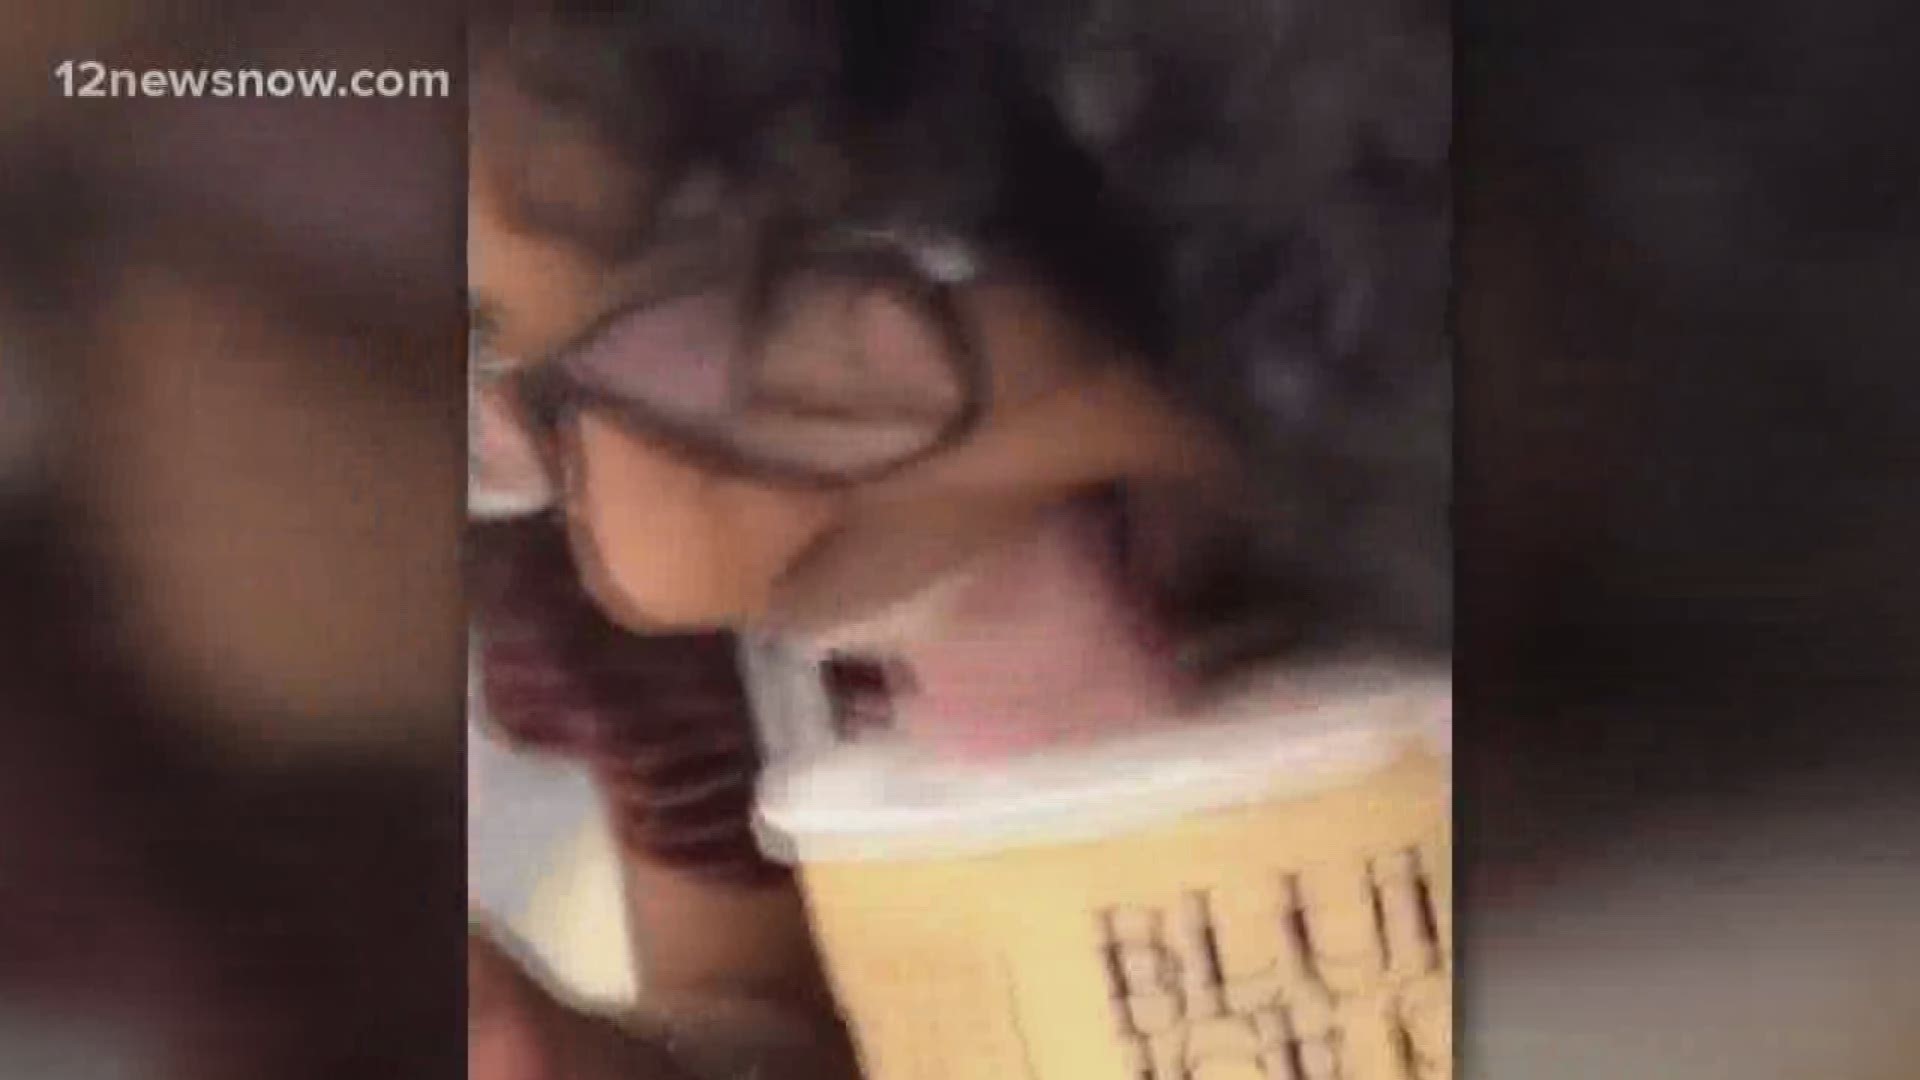 The woman can be seen licking a tub of ice cream and placing it back in the grocery store freezer.